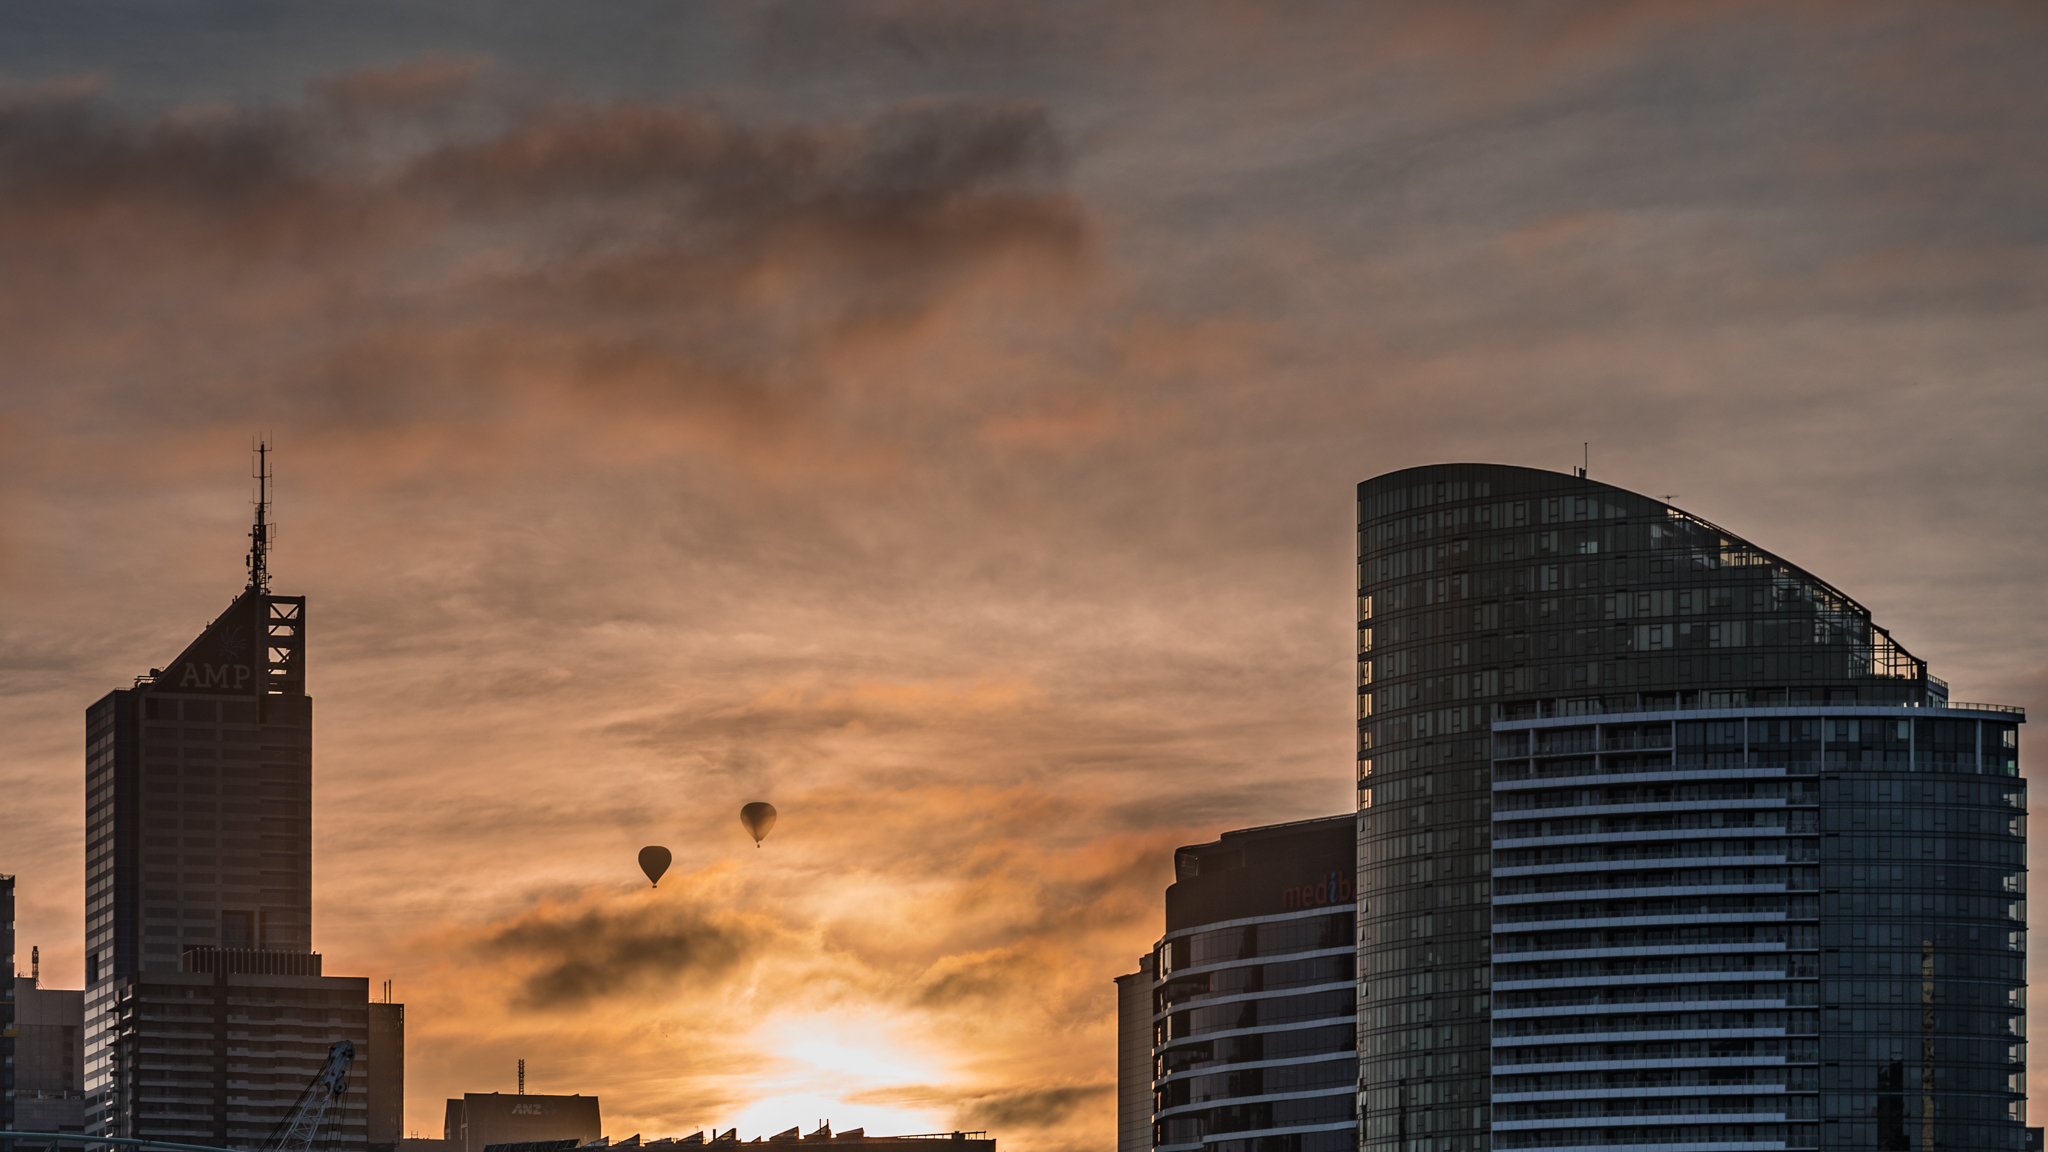 Melbourne's only Photography Cruise - Capture Melbourne from the best angle!